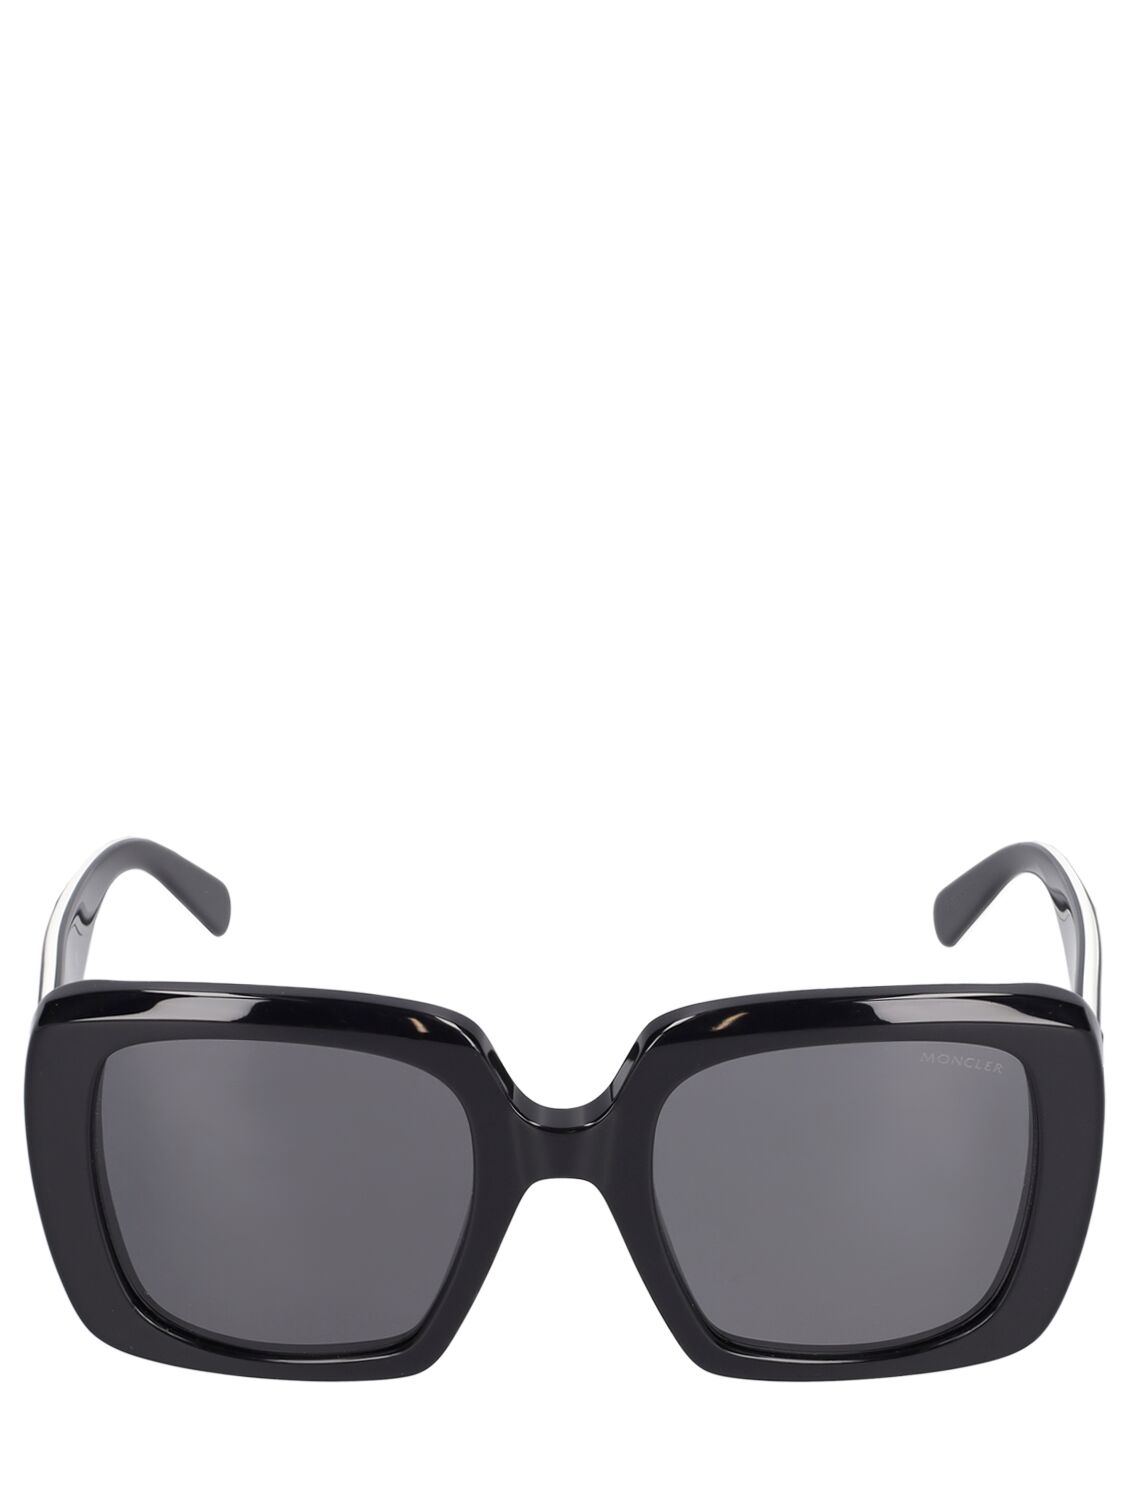 Moncler Blanche Squared Acetate Sunglasses In Shiny Black